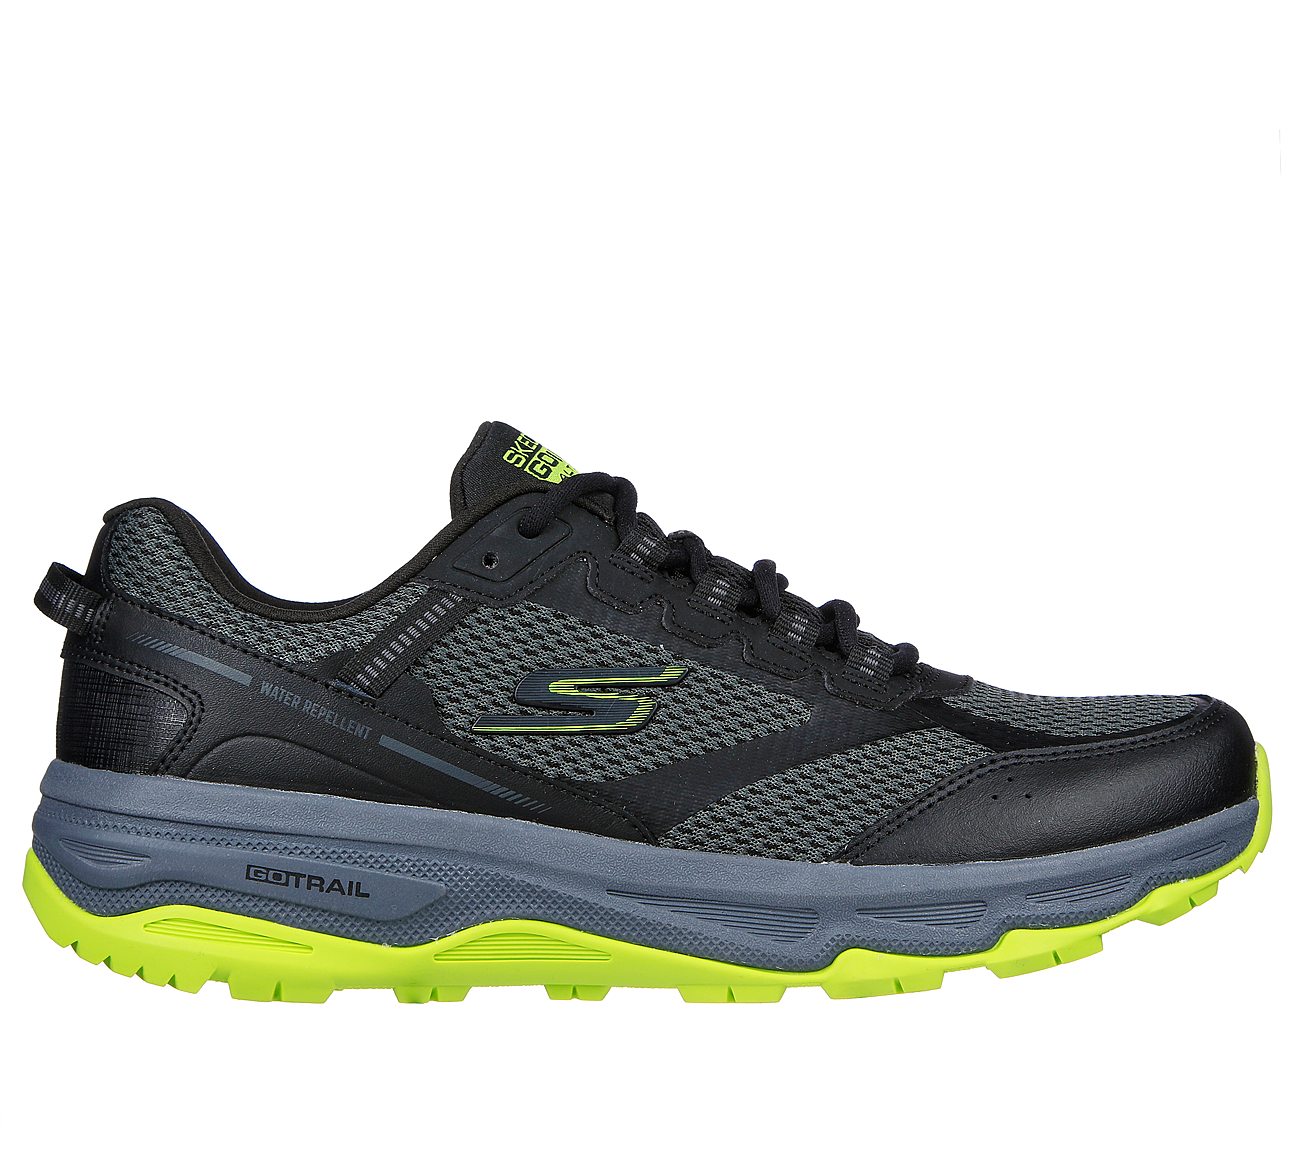 GO RUN TRAIL ALTITUDE, BLACK/LIME Footwear Lateral View